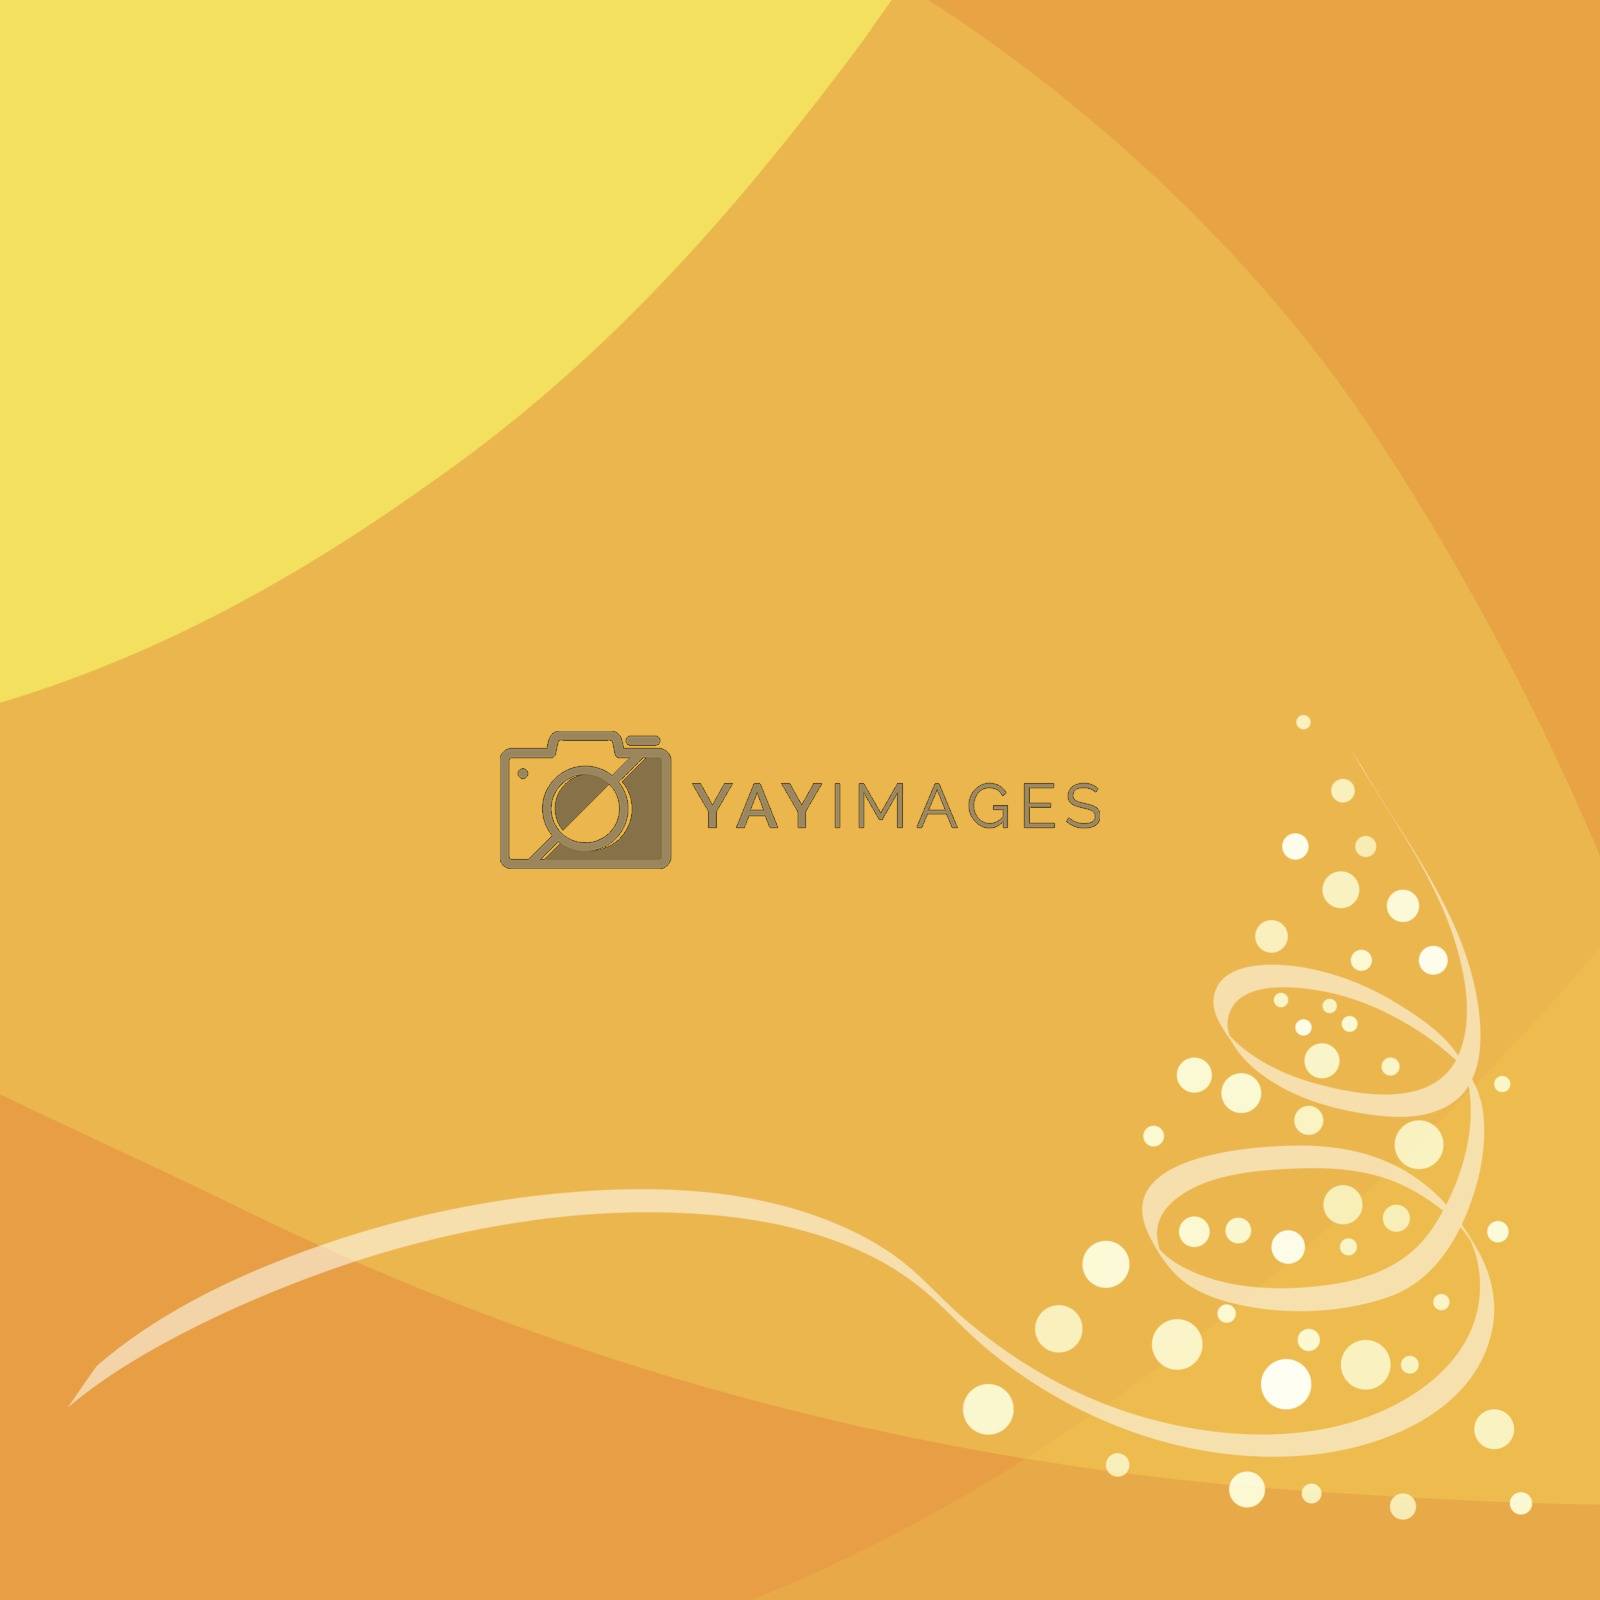 Royalty free image of Christmas background by ggebl